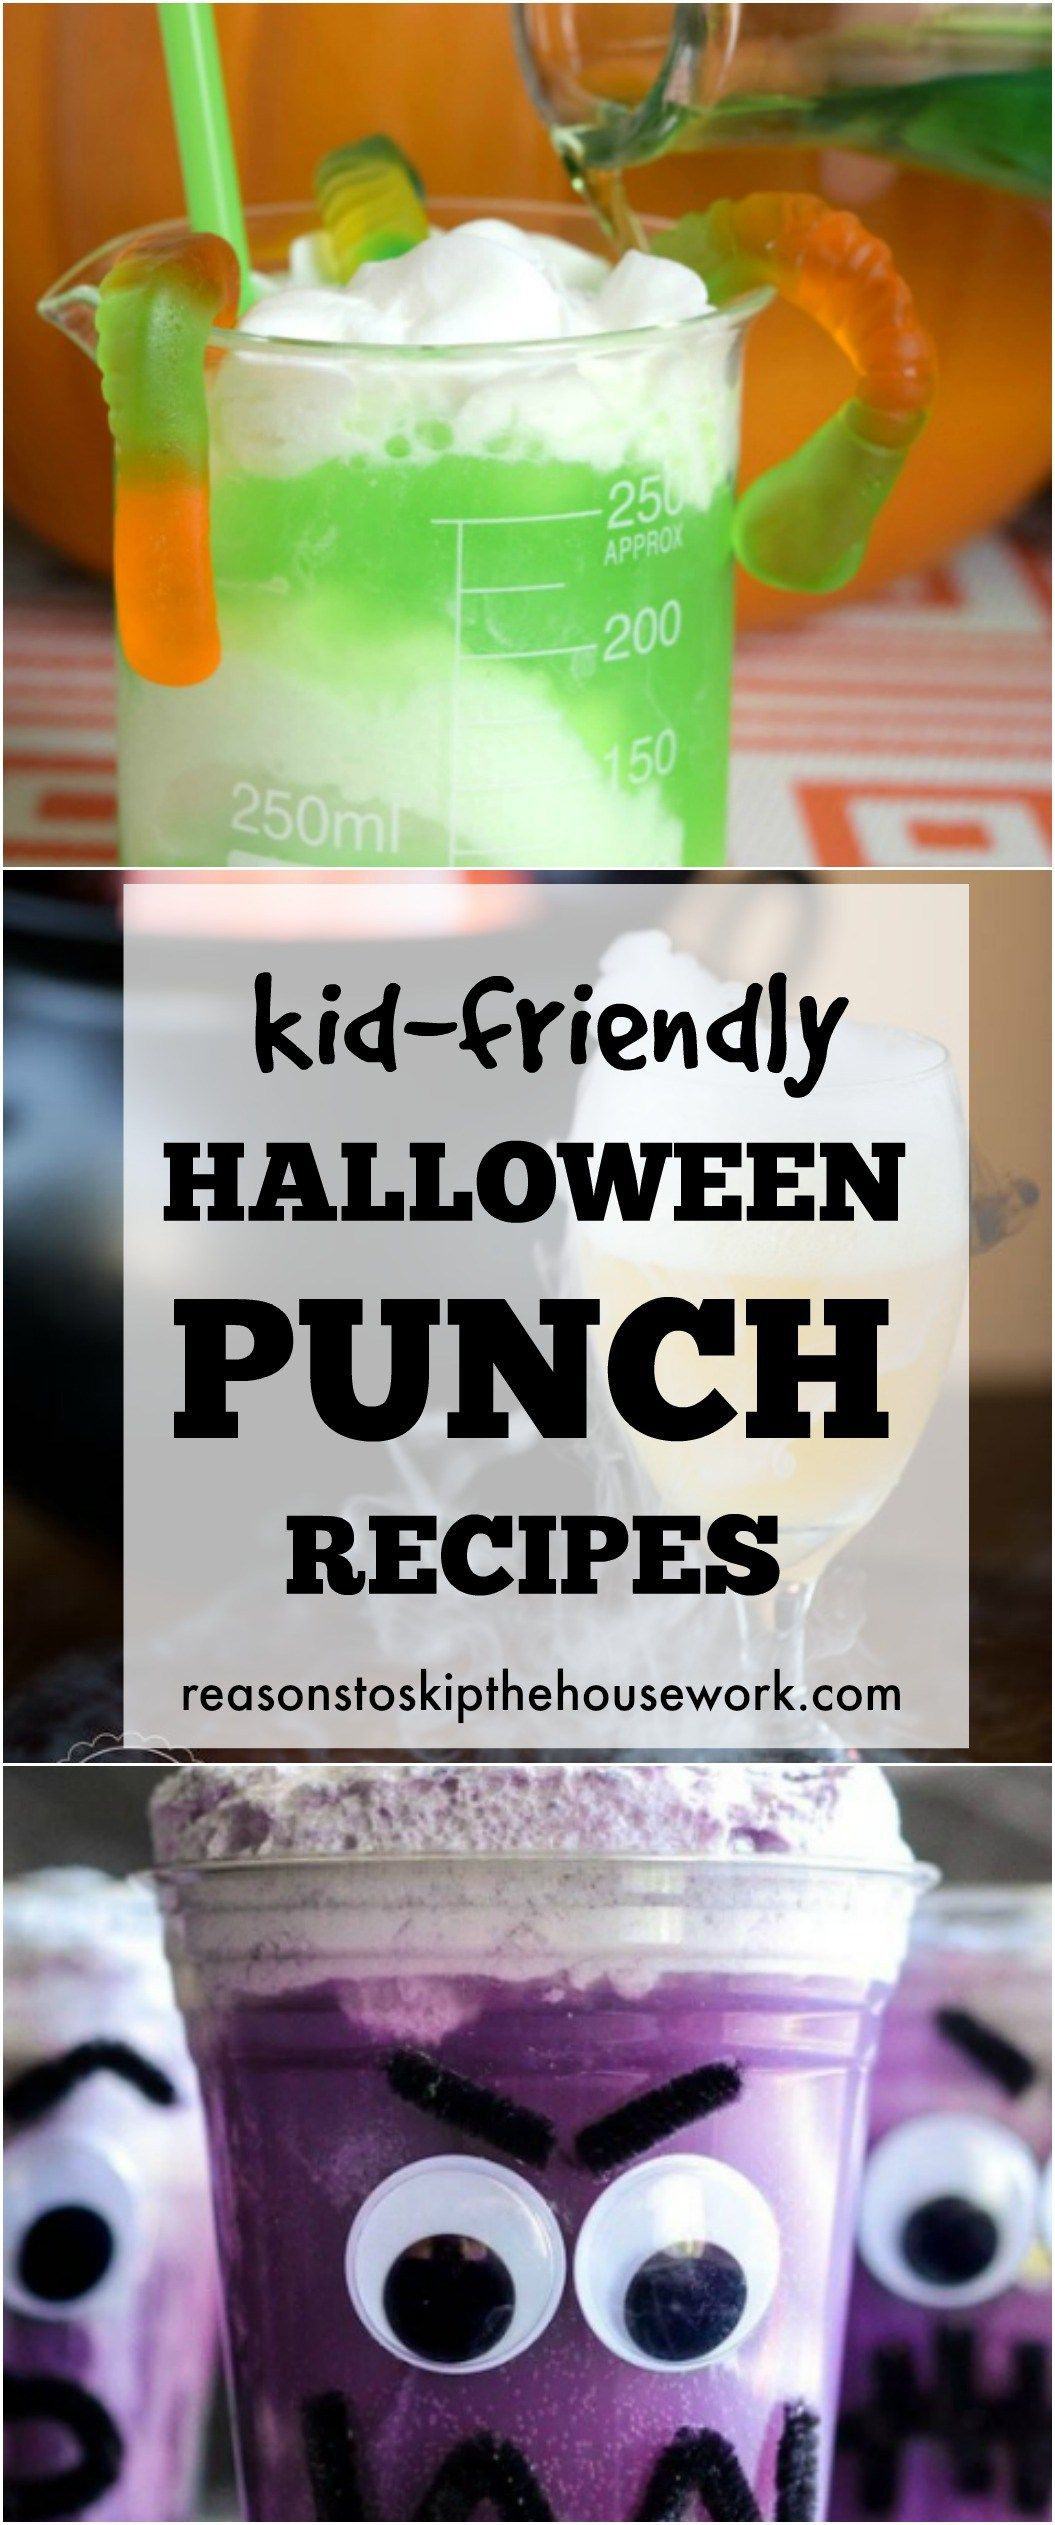 Halloween Punch For Kids DIY
 Kid Friendly Halloween Punch Recipes that are sure to